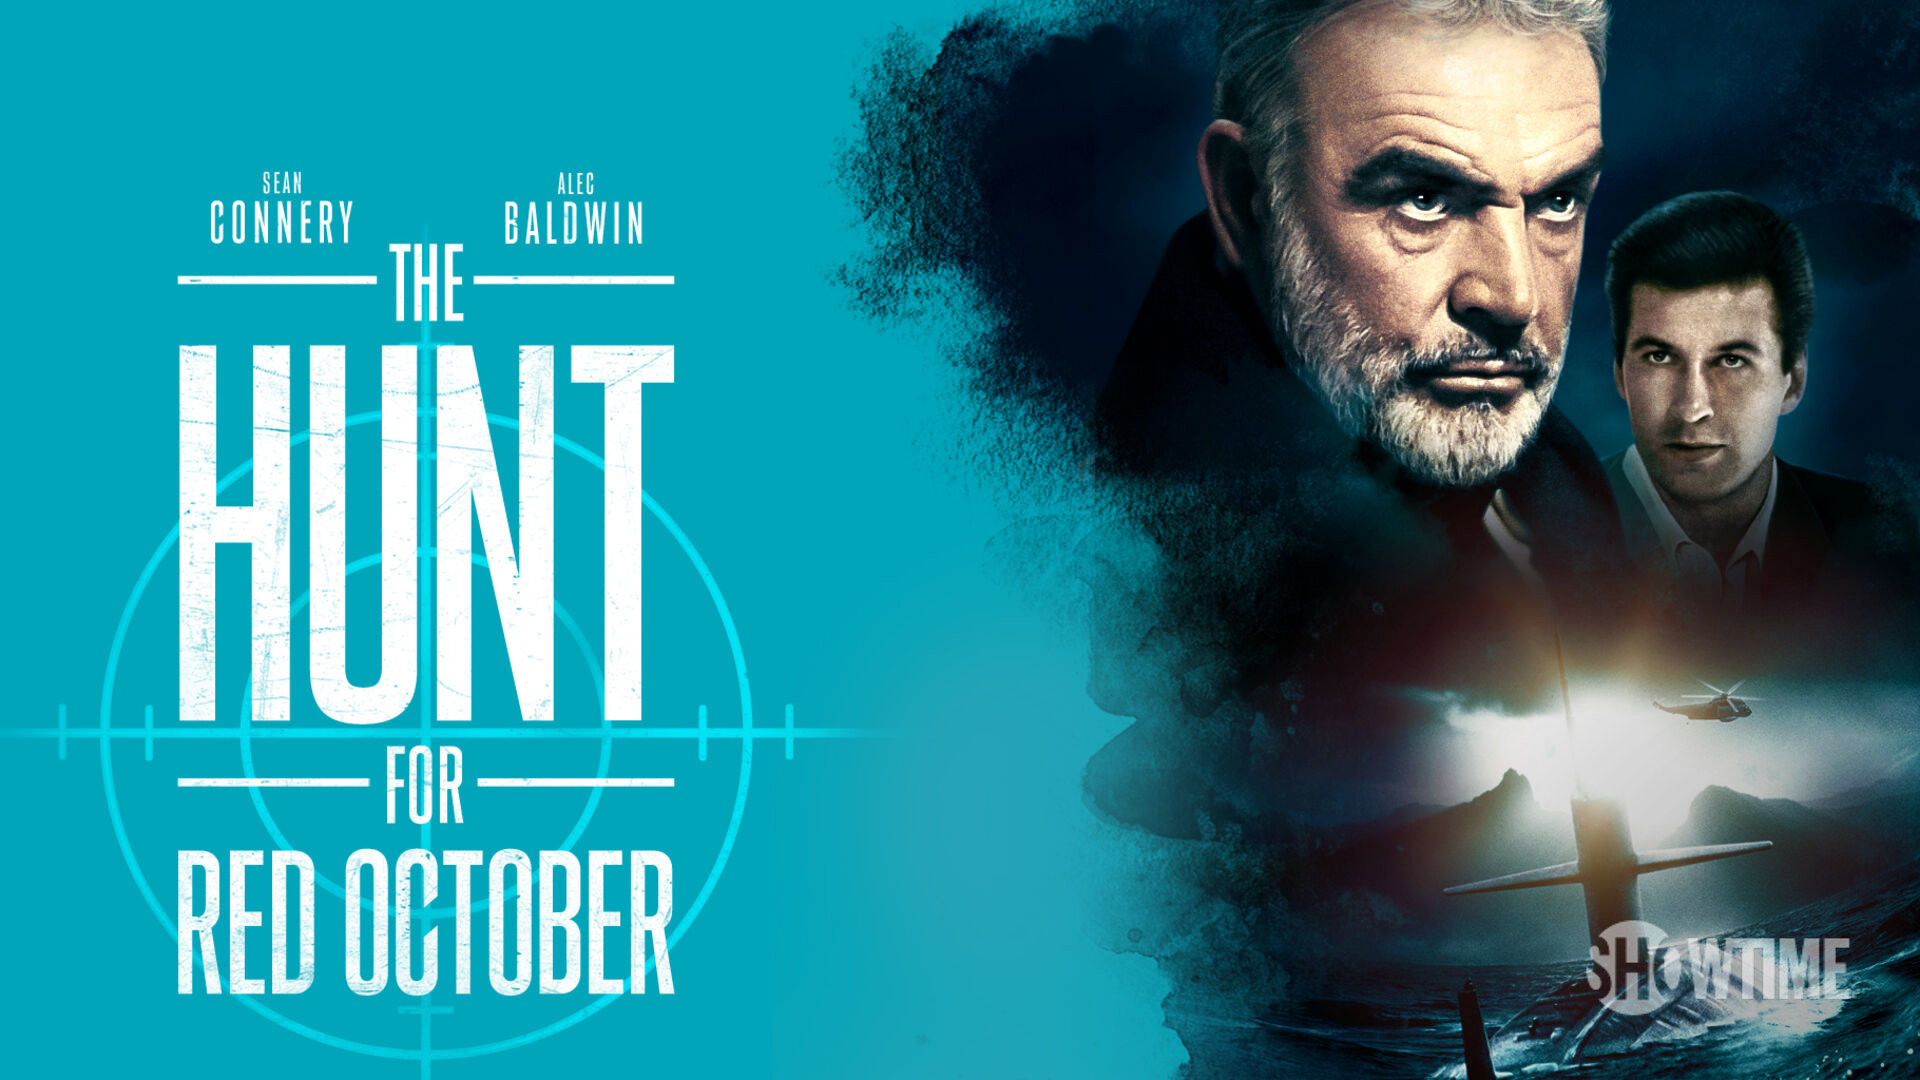 for Red October Full Movie on Paramount Plus